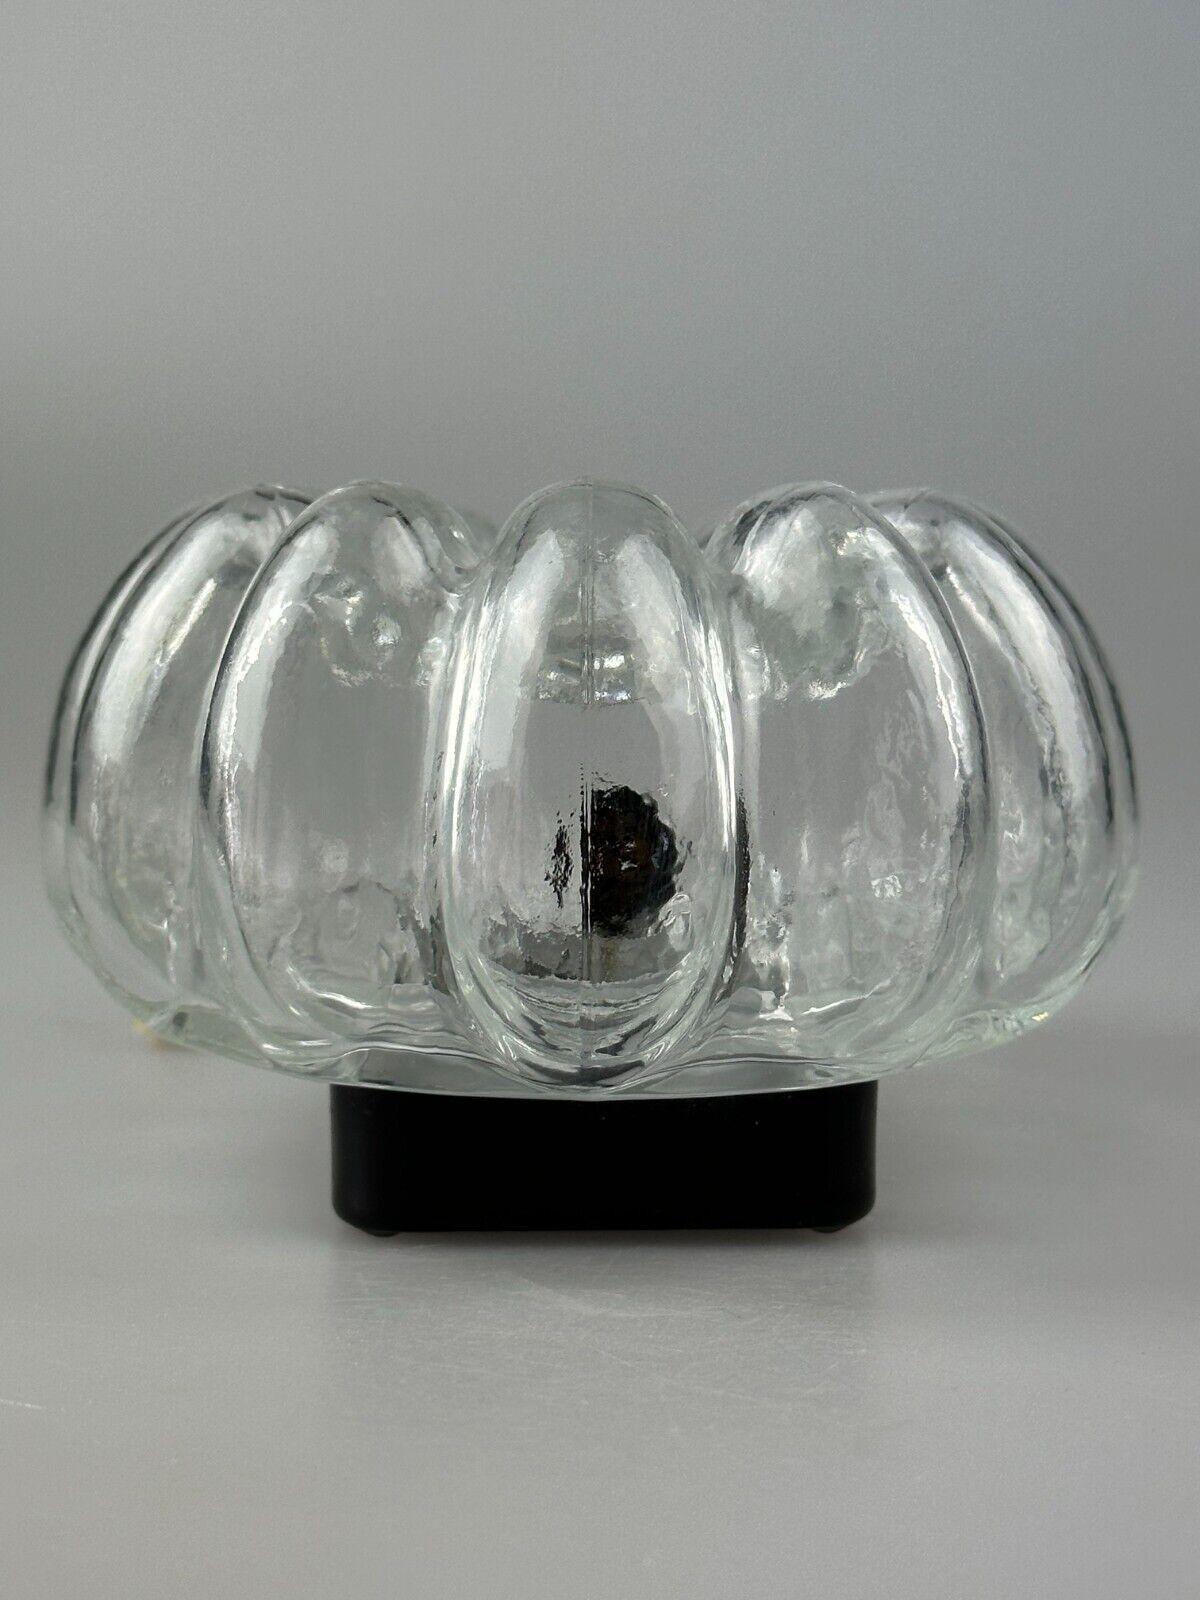 60s 70s wall lamp made of glass & metal bubble wall sconce space age design For Sale 3